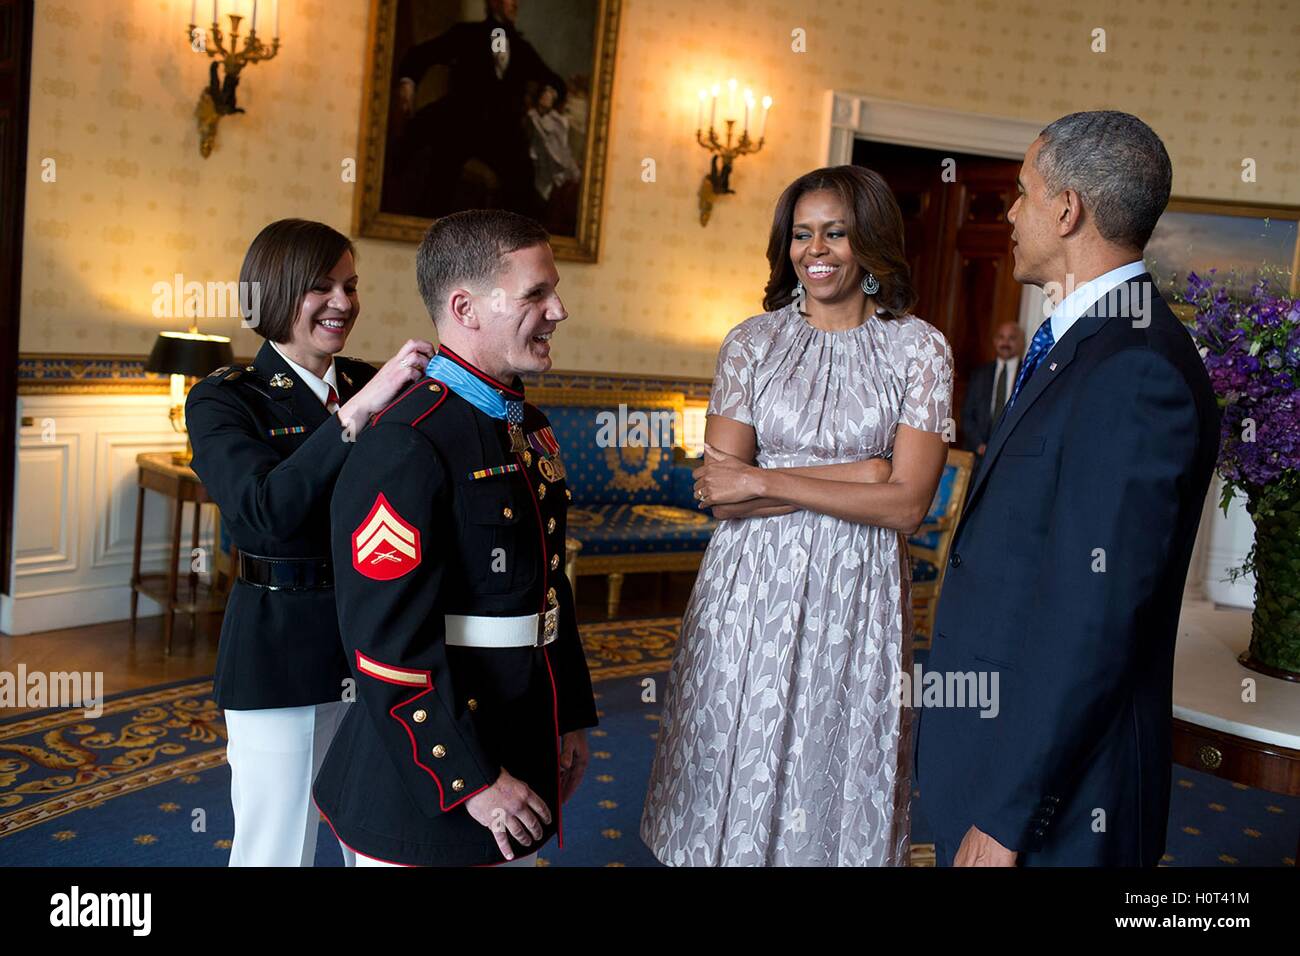 U.S. President Barack Obama and First Lady Michelle Obama talk with U.S. Marine William Kyle Carpenter in the Blue Room following a Medal of Honor ceremony June 19, 2104 in Washington, DC. Stock Photo